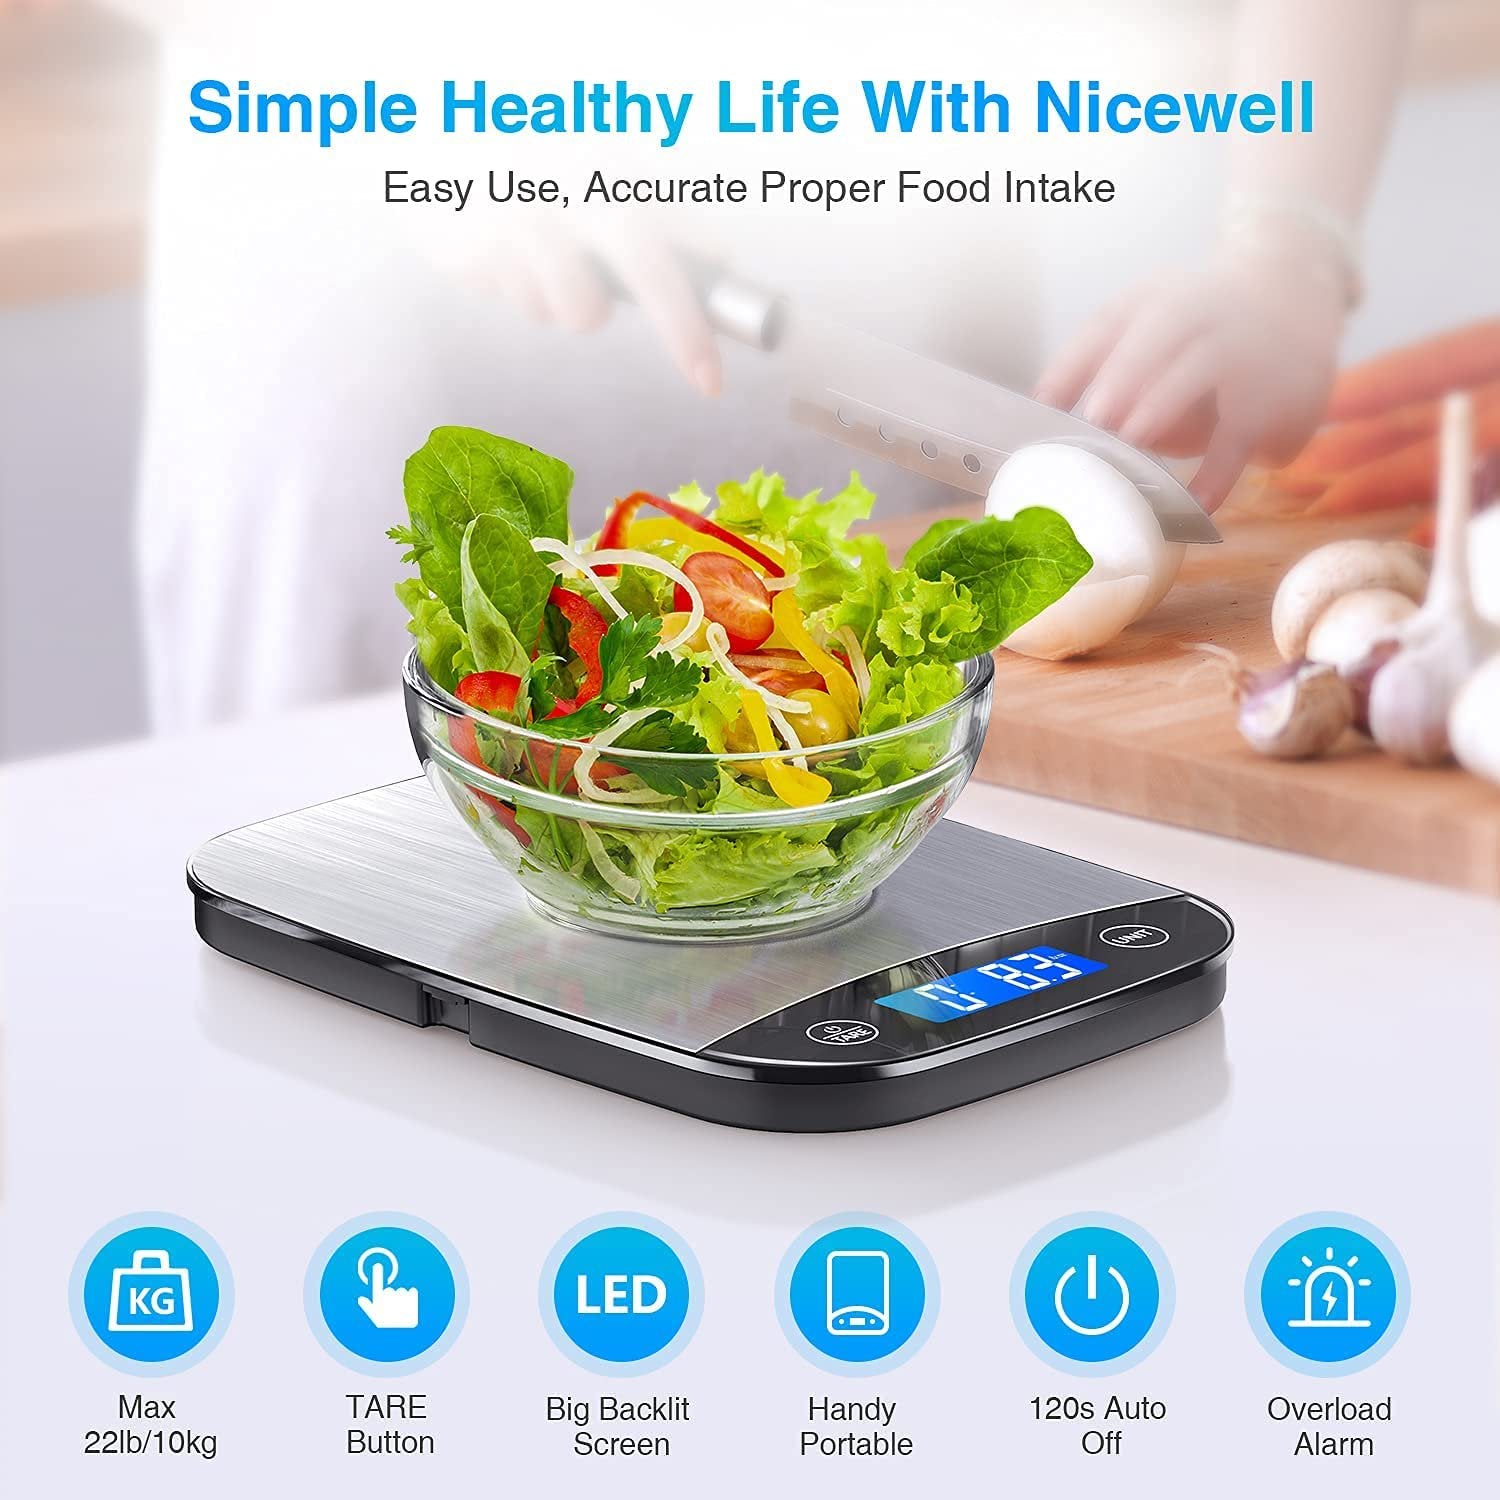 Nicewell Food Scale, 22lb Digital Kitchen White 